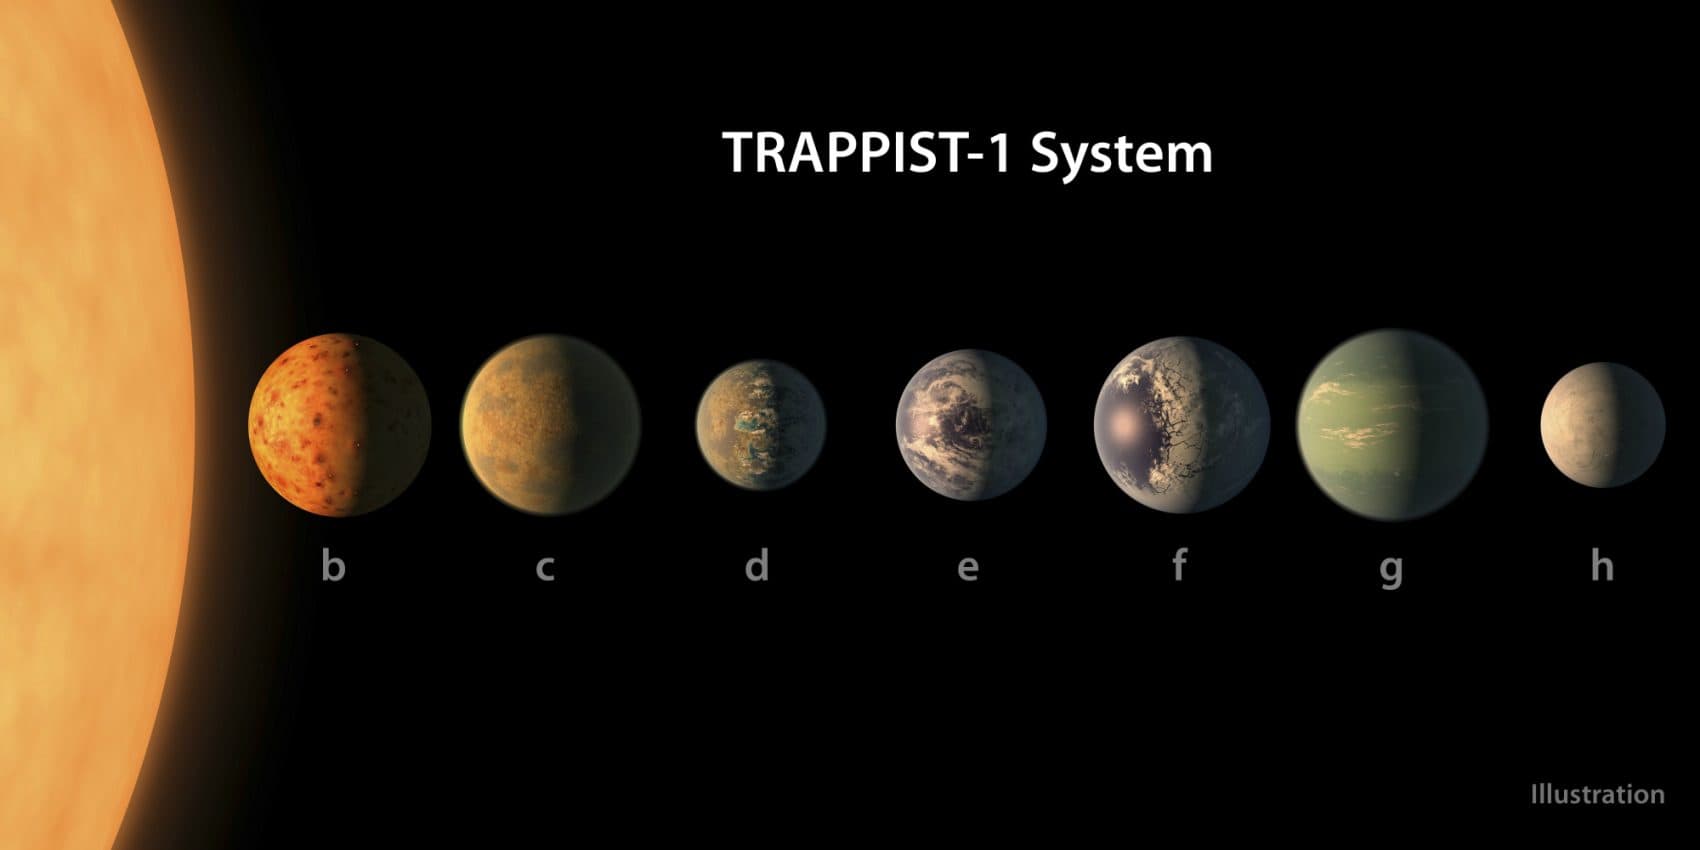 Exactly how far away is this system? asks Joelle Renstrom. How long would it take to get there? Pictured: This artist's conception shows what the TRAPPIST-1 planetary system may look like, based on available data about their diameters, masses and distances from the host star. (NASA/JPL-Caltech)